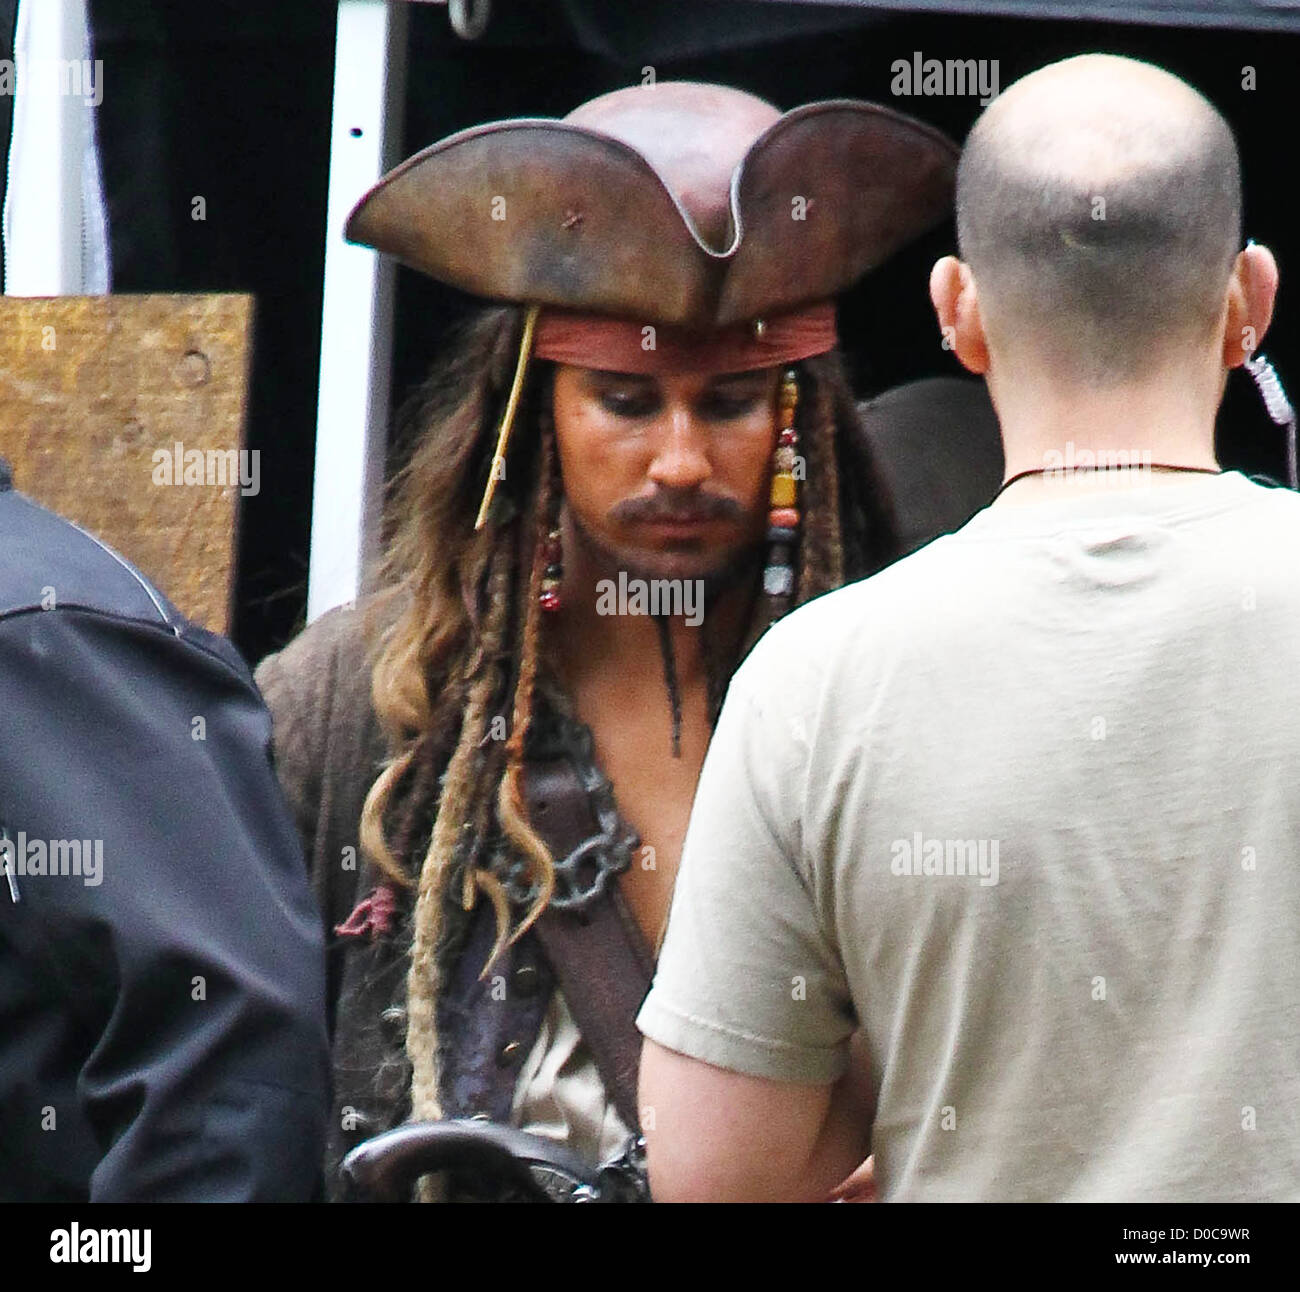 Stunt double for Johnny Depp's Captain Jack Sparrow on the film set of 'Pirates of the Caribbean: On Stranger Tides' filming on Stock Photo